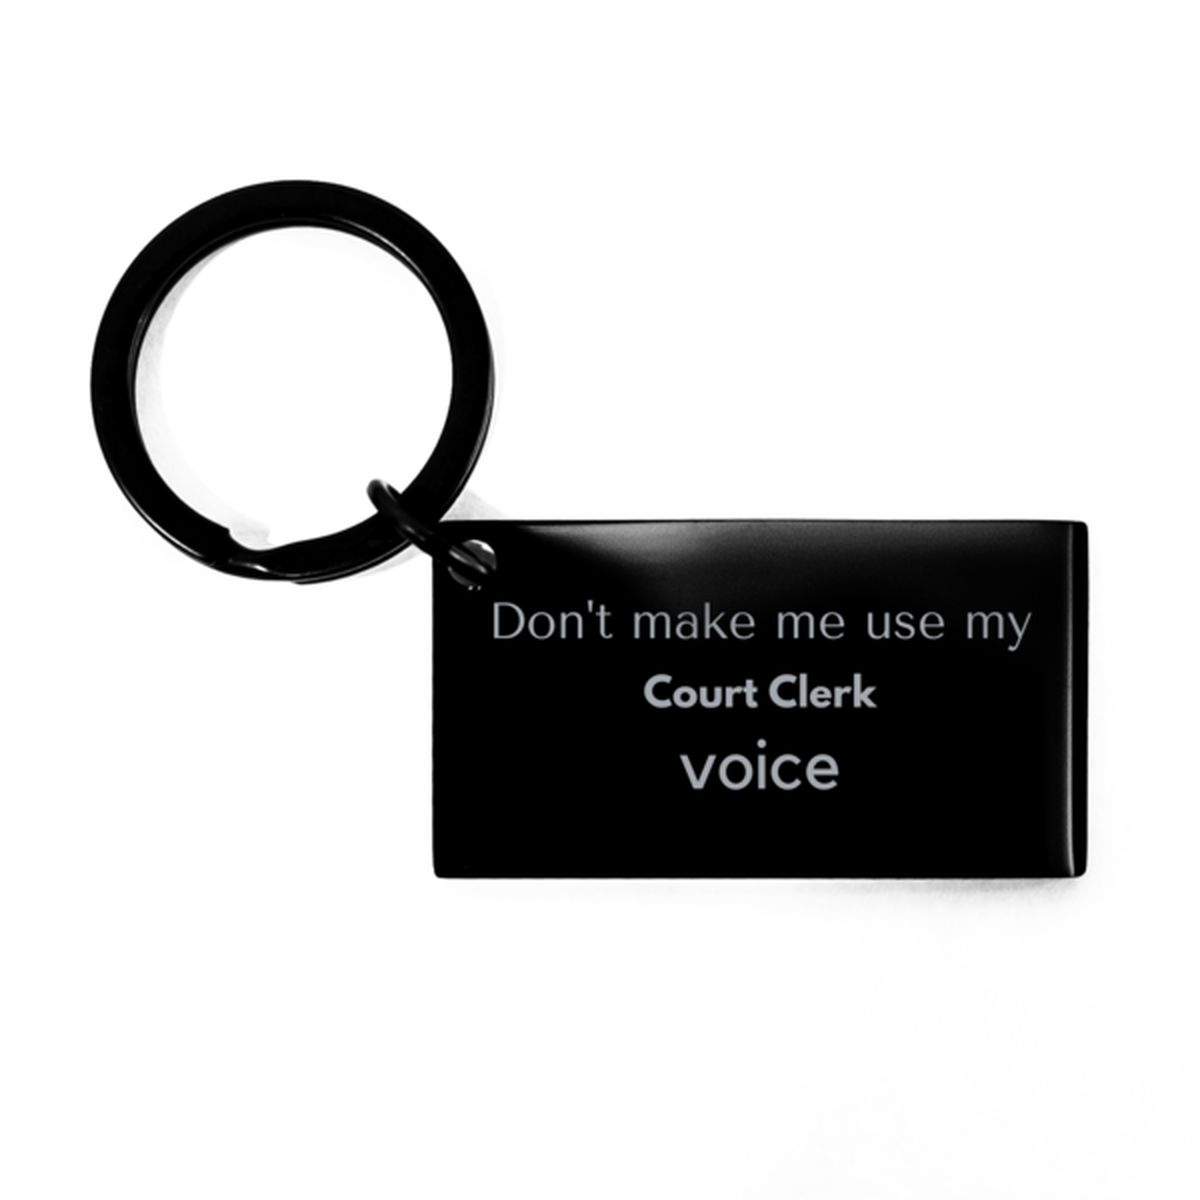 Don't make me use my Court Clerk voice, Sarcasm Court Clerk Gifts, Christmas Court Clerk Keychain Birthday Unique Gifts For Court Clerk Coworkers, Men, Women, Colleague, Friends